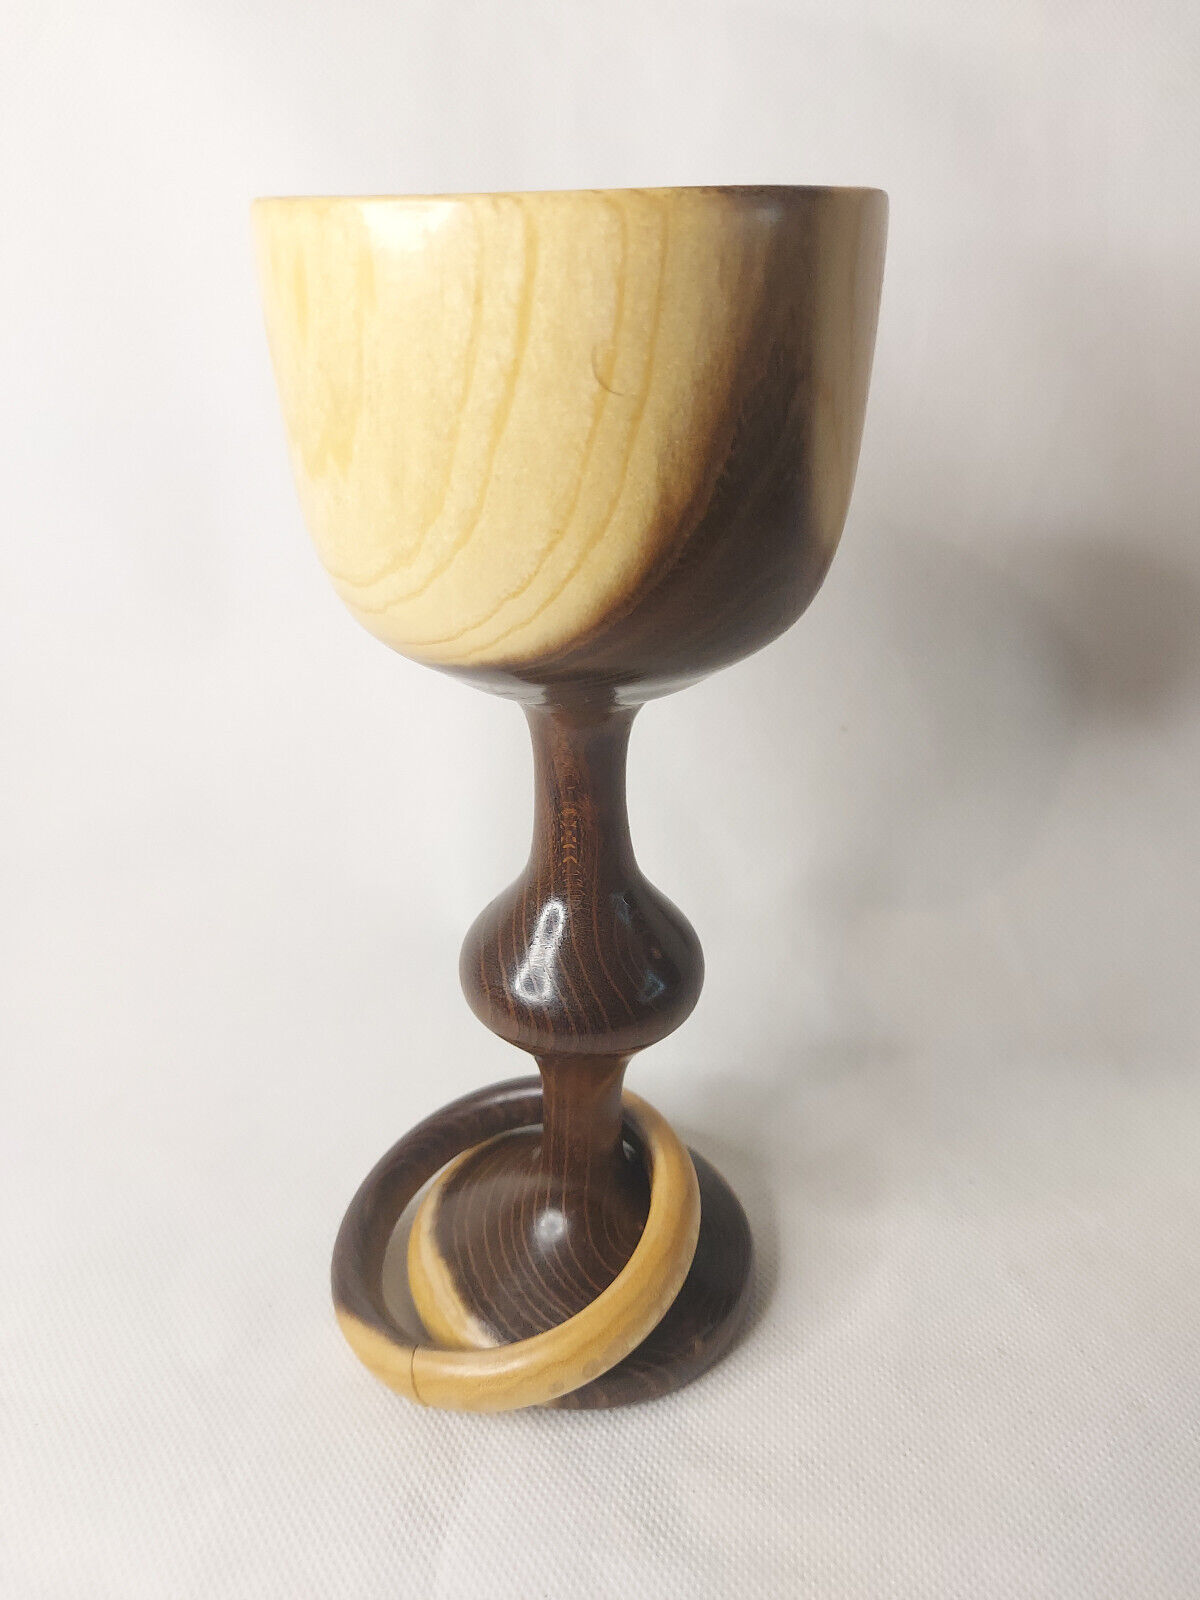 Hand Carved Captive Ring Goblet / Cup